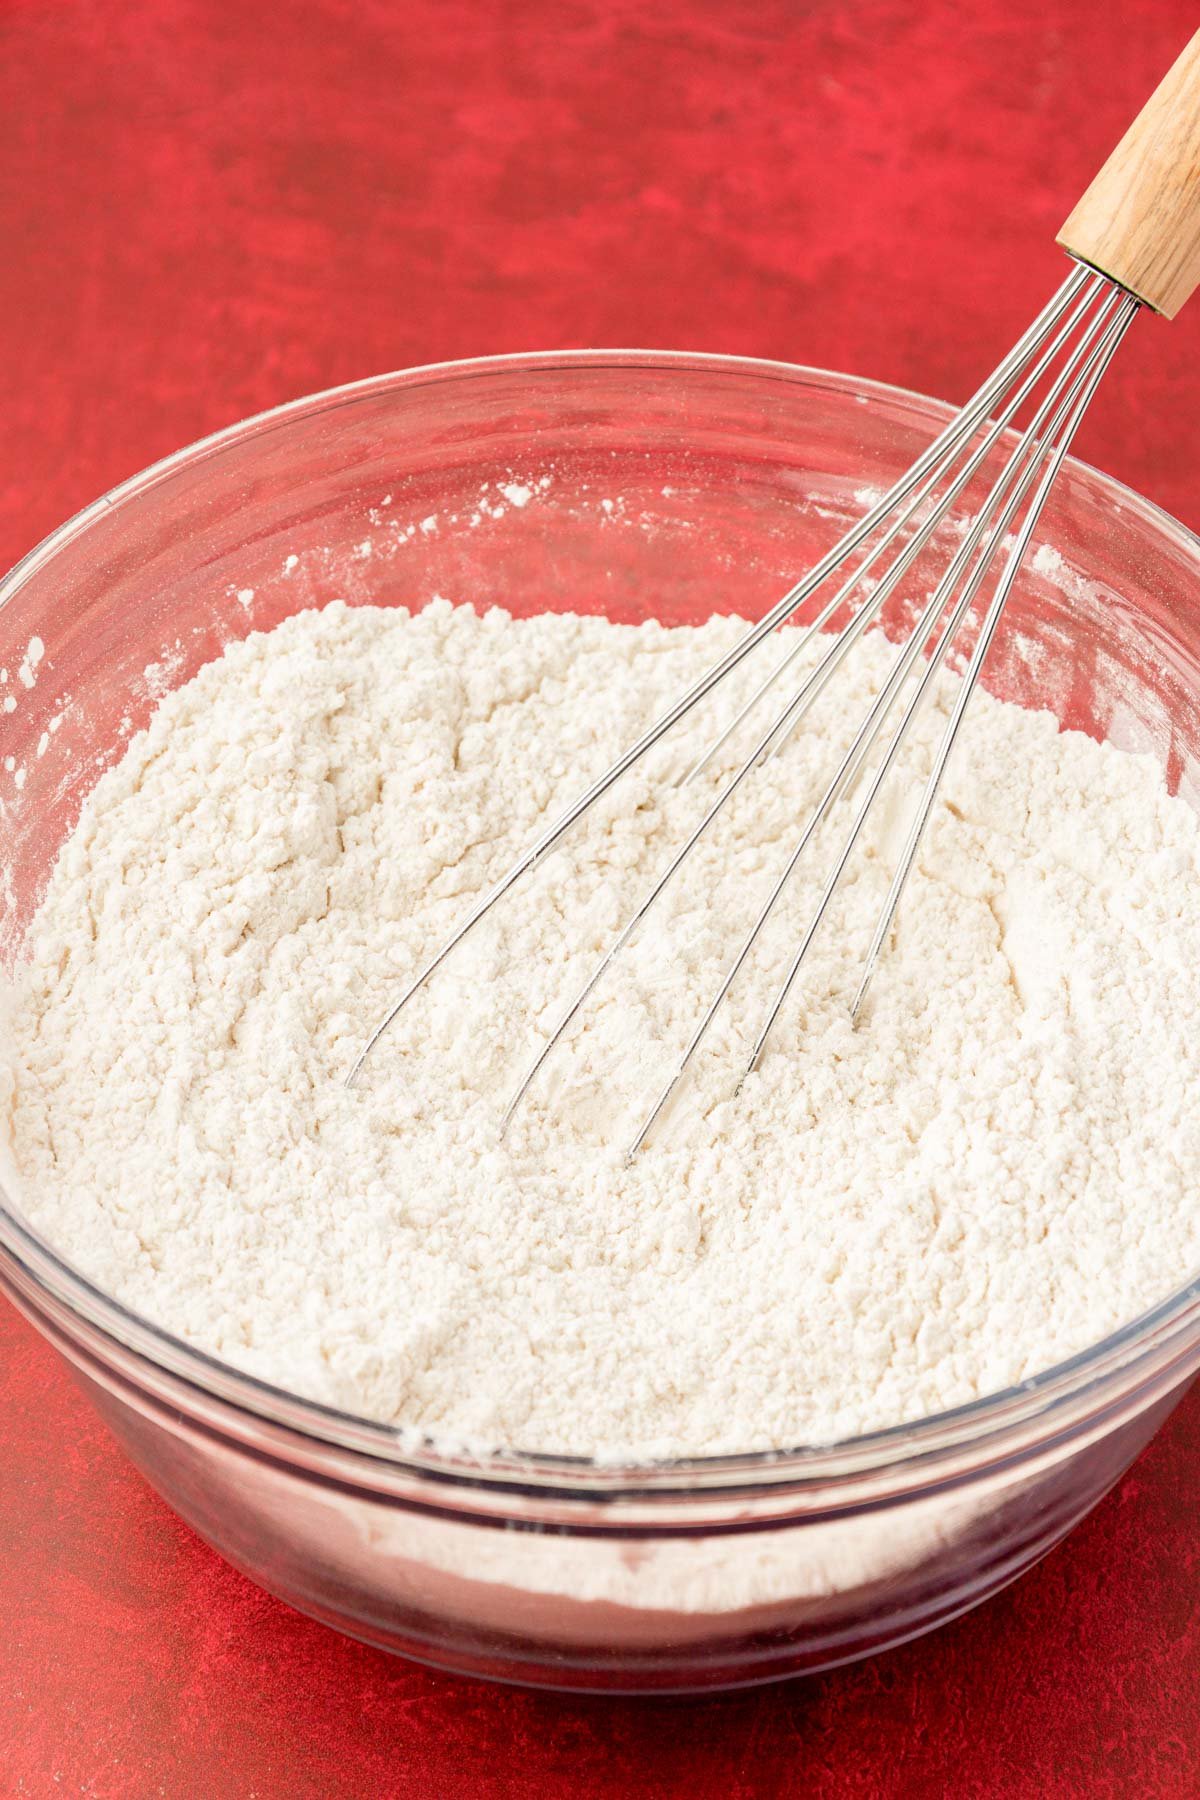 Dry ingredients being whisked in a glass bowl.